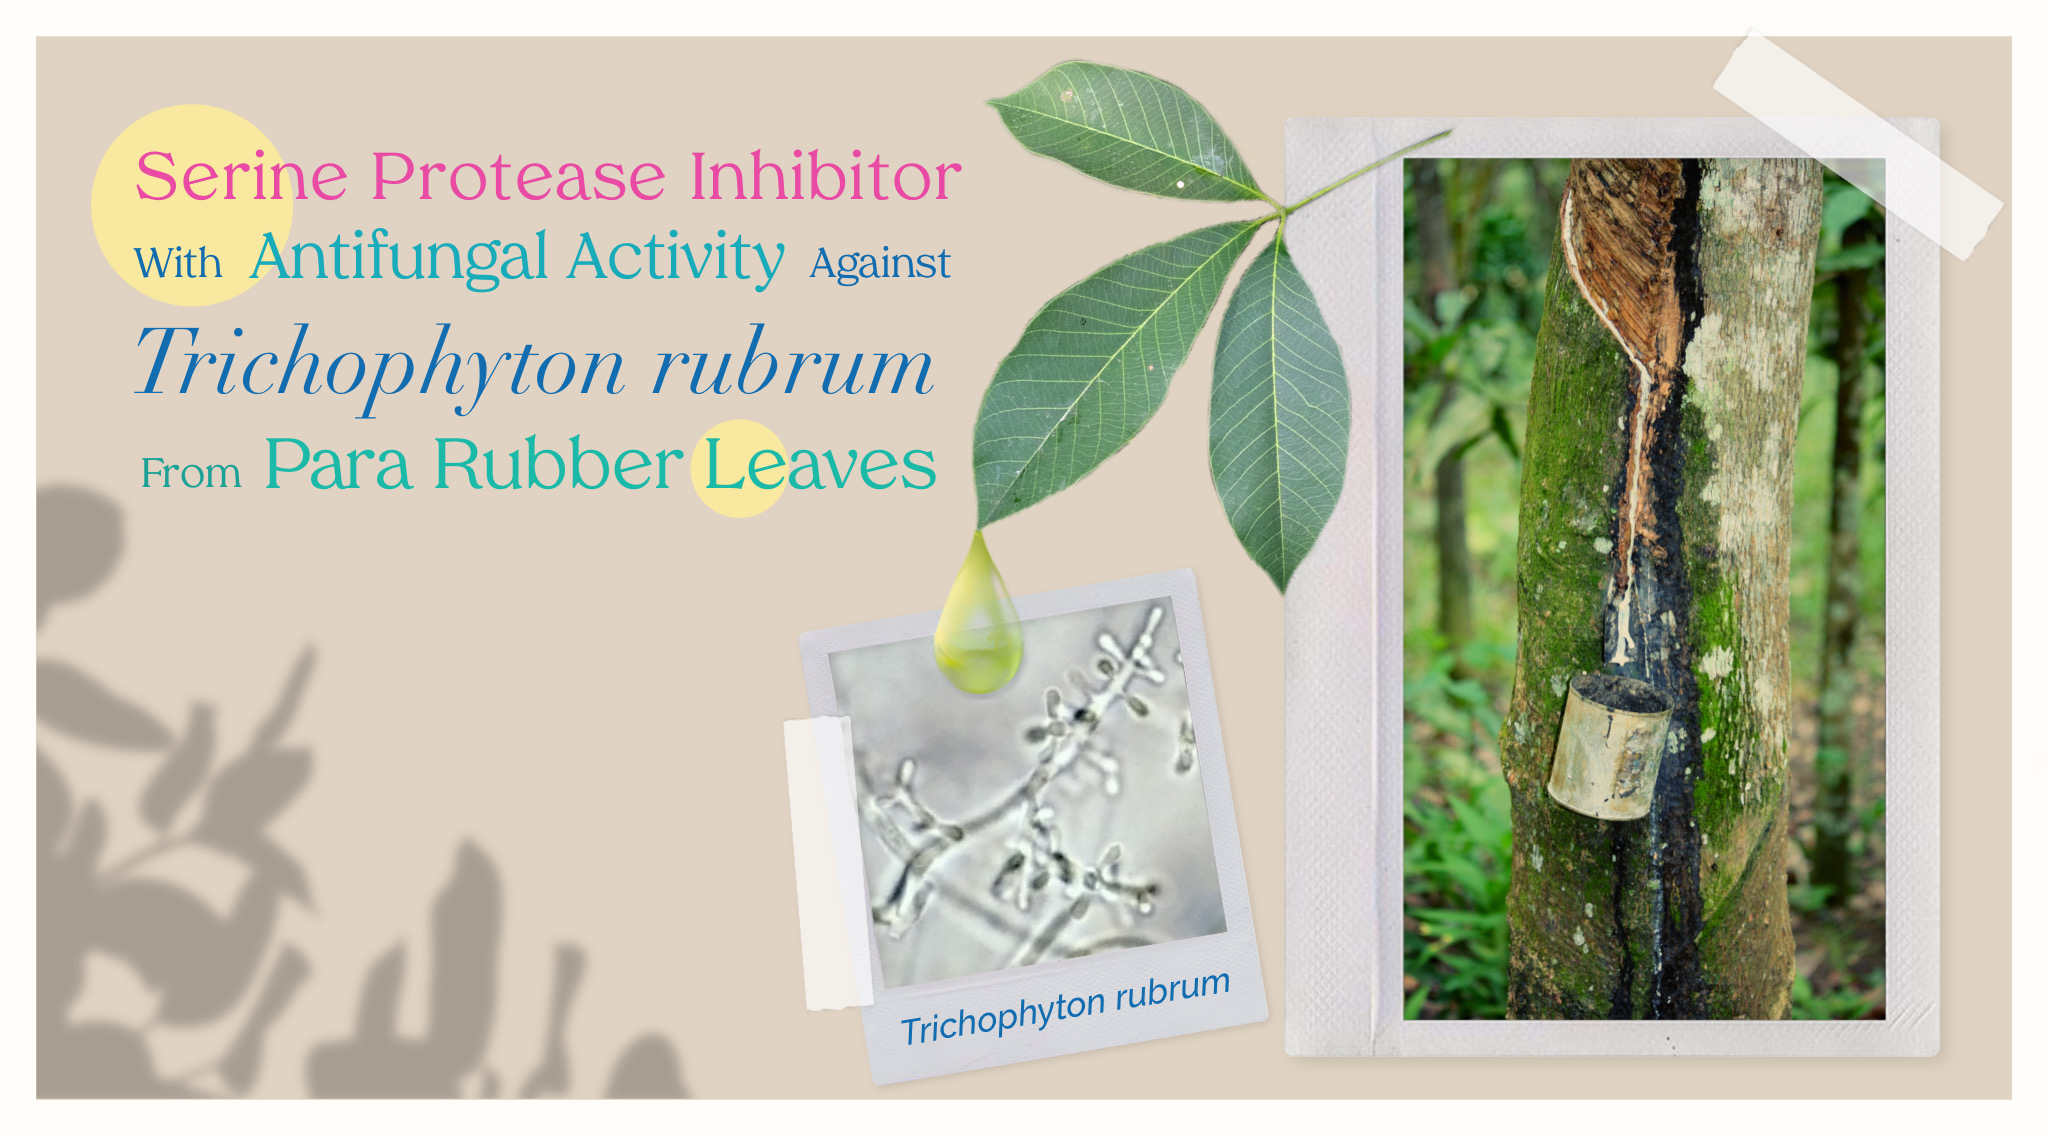 Serine protease inhibitor with antifungal activity against Trichophyton rubrum from Para rubber leaves